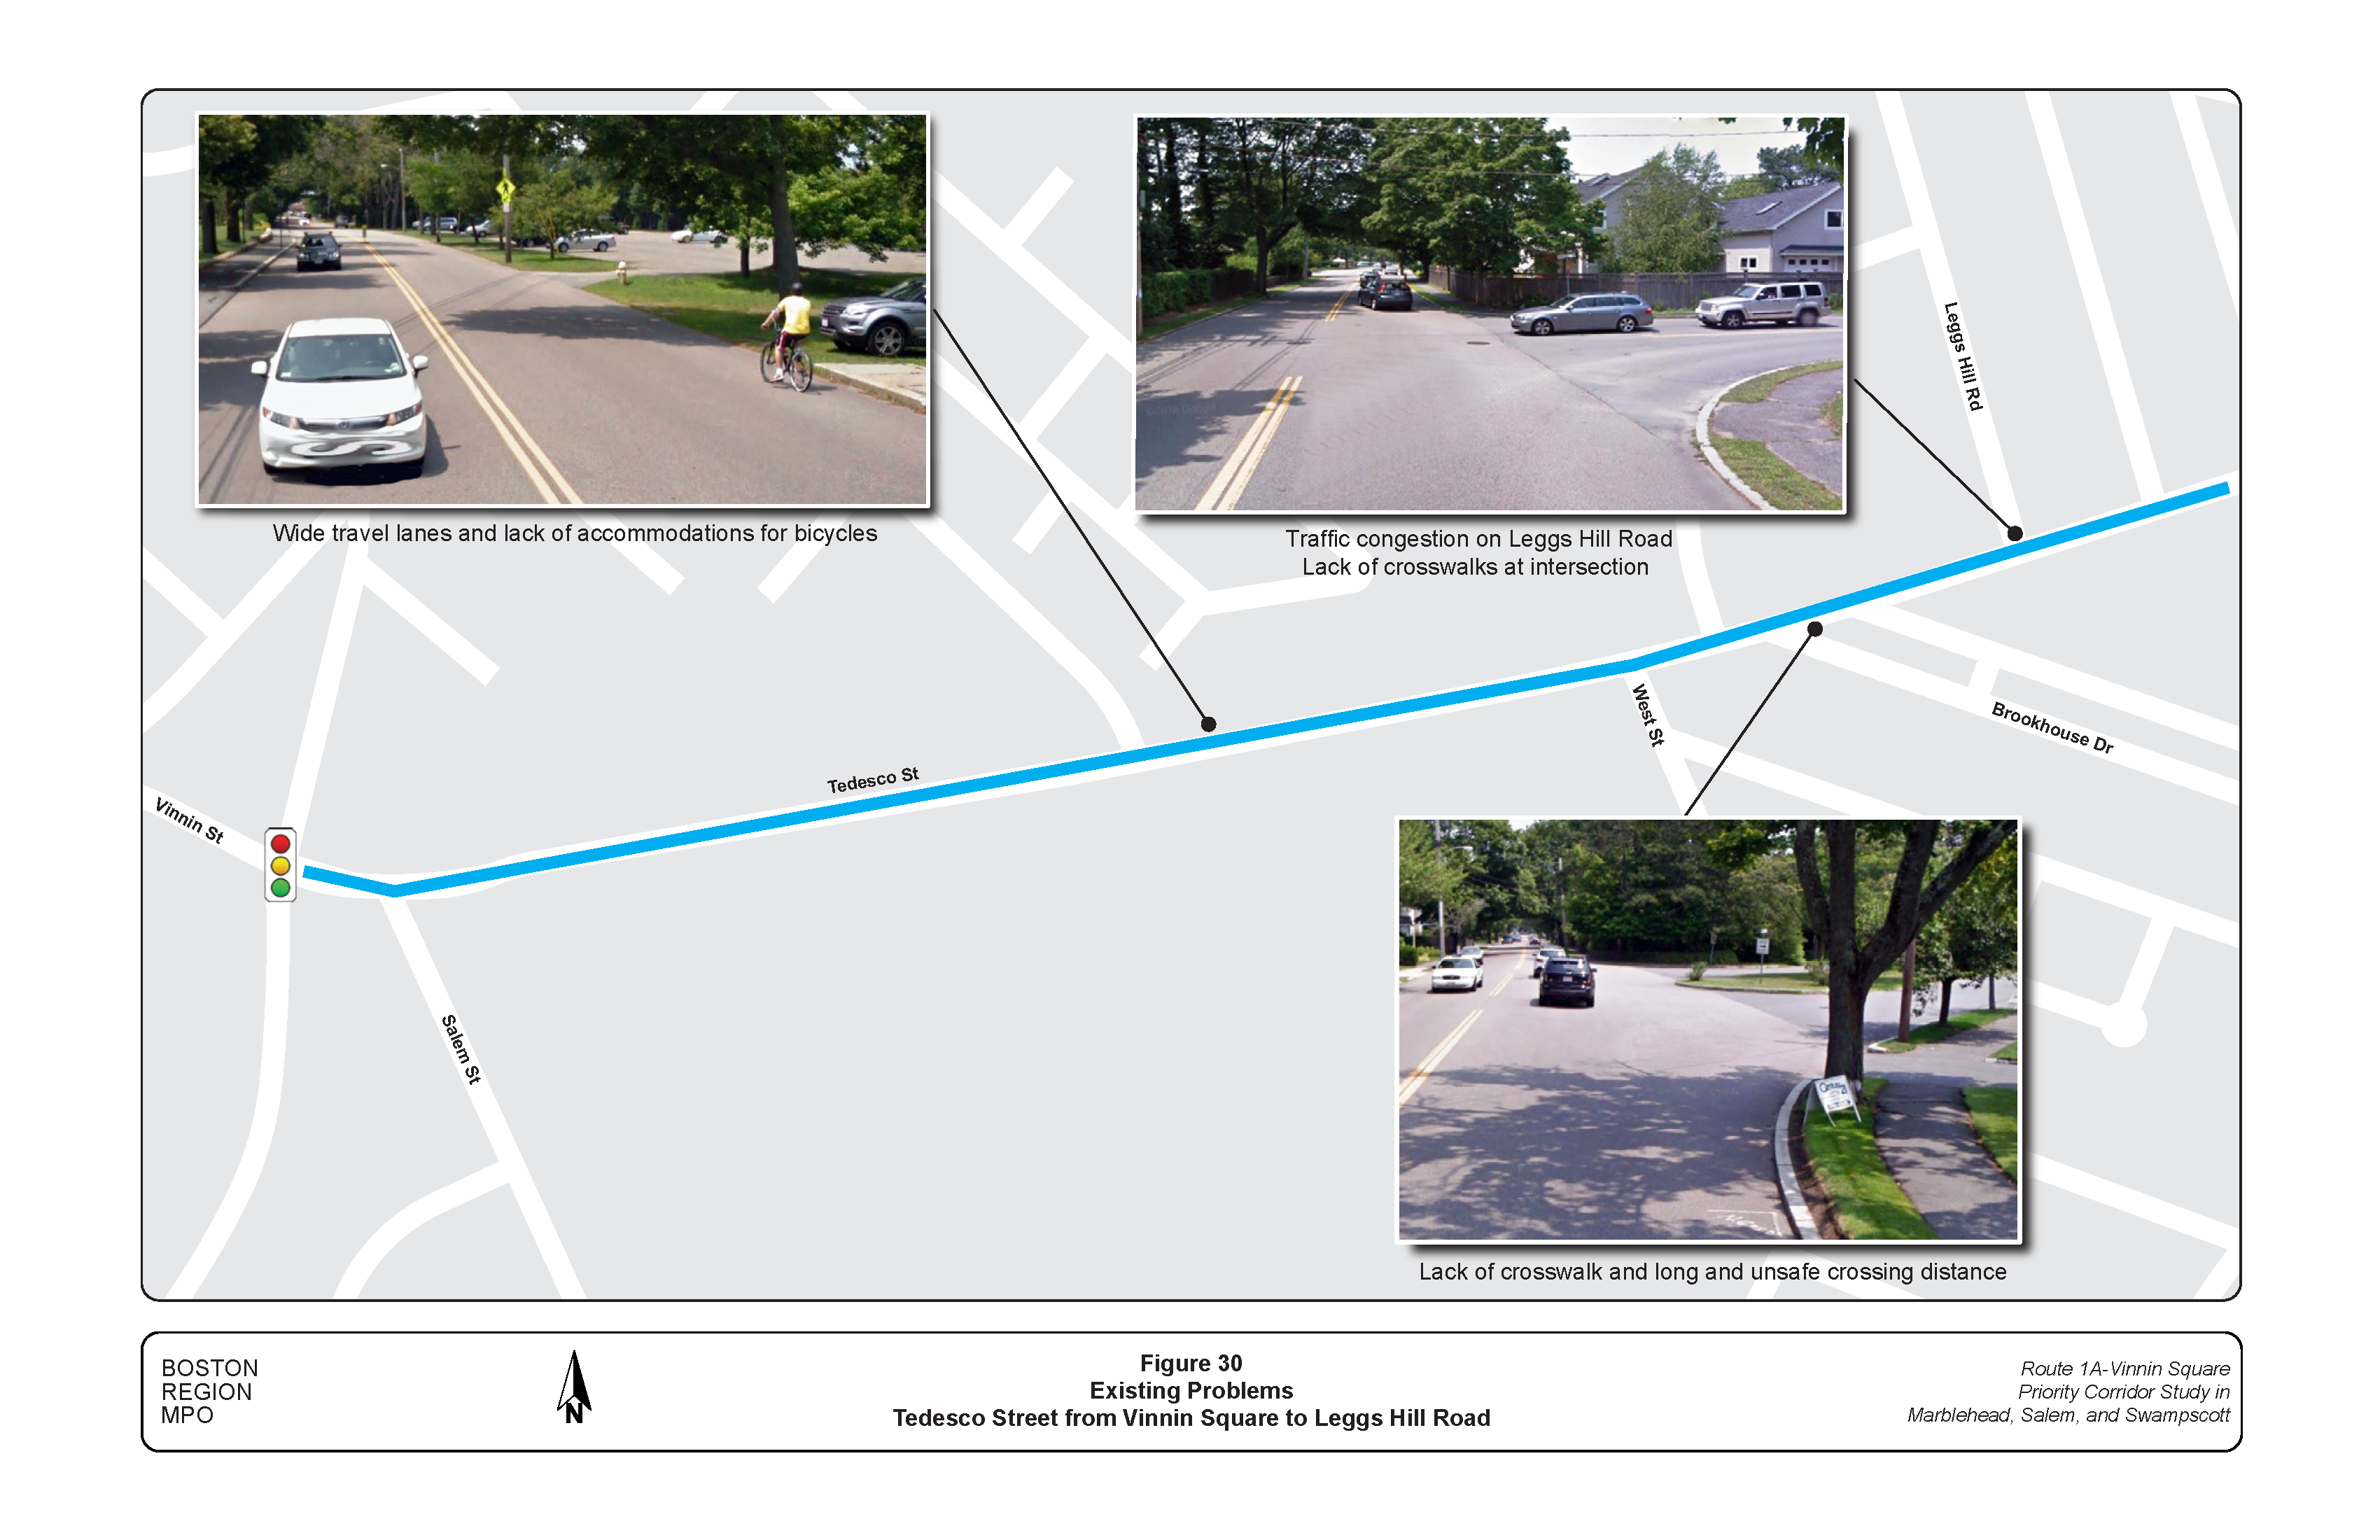 FIGURE 30. Existing Problems: Tedesco Street from Vinnin Square to Leggs Hill Road.Figure 30 is a map of Tedesco Street between Vinnin Square and Leggs Hill Road. Photos embedded show problems at three locations.